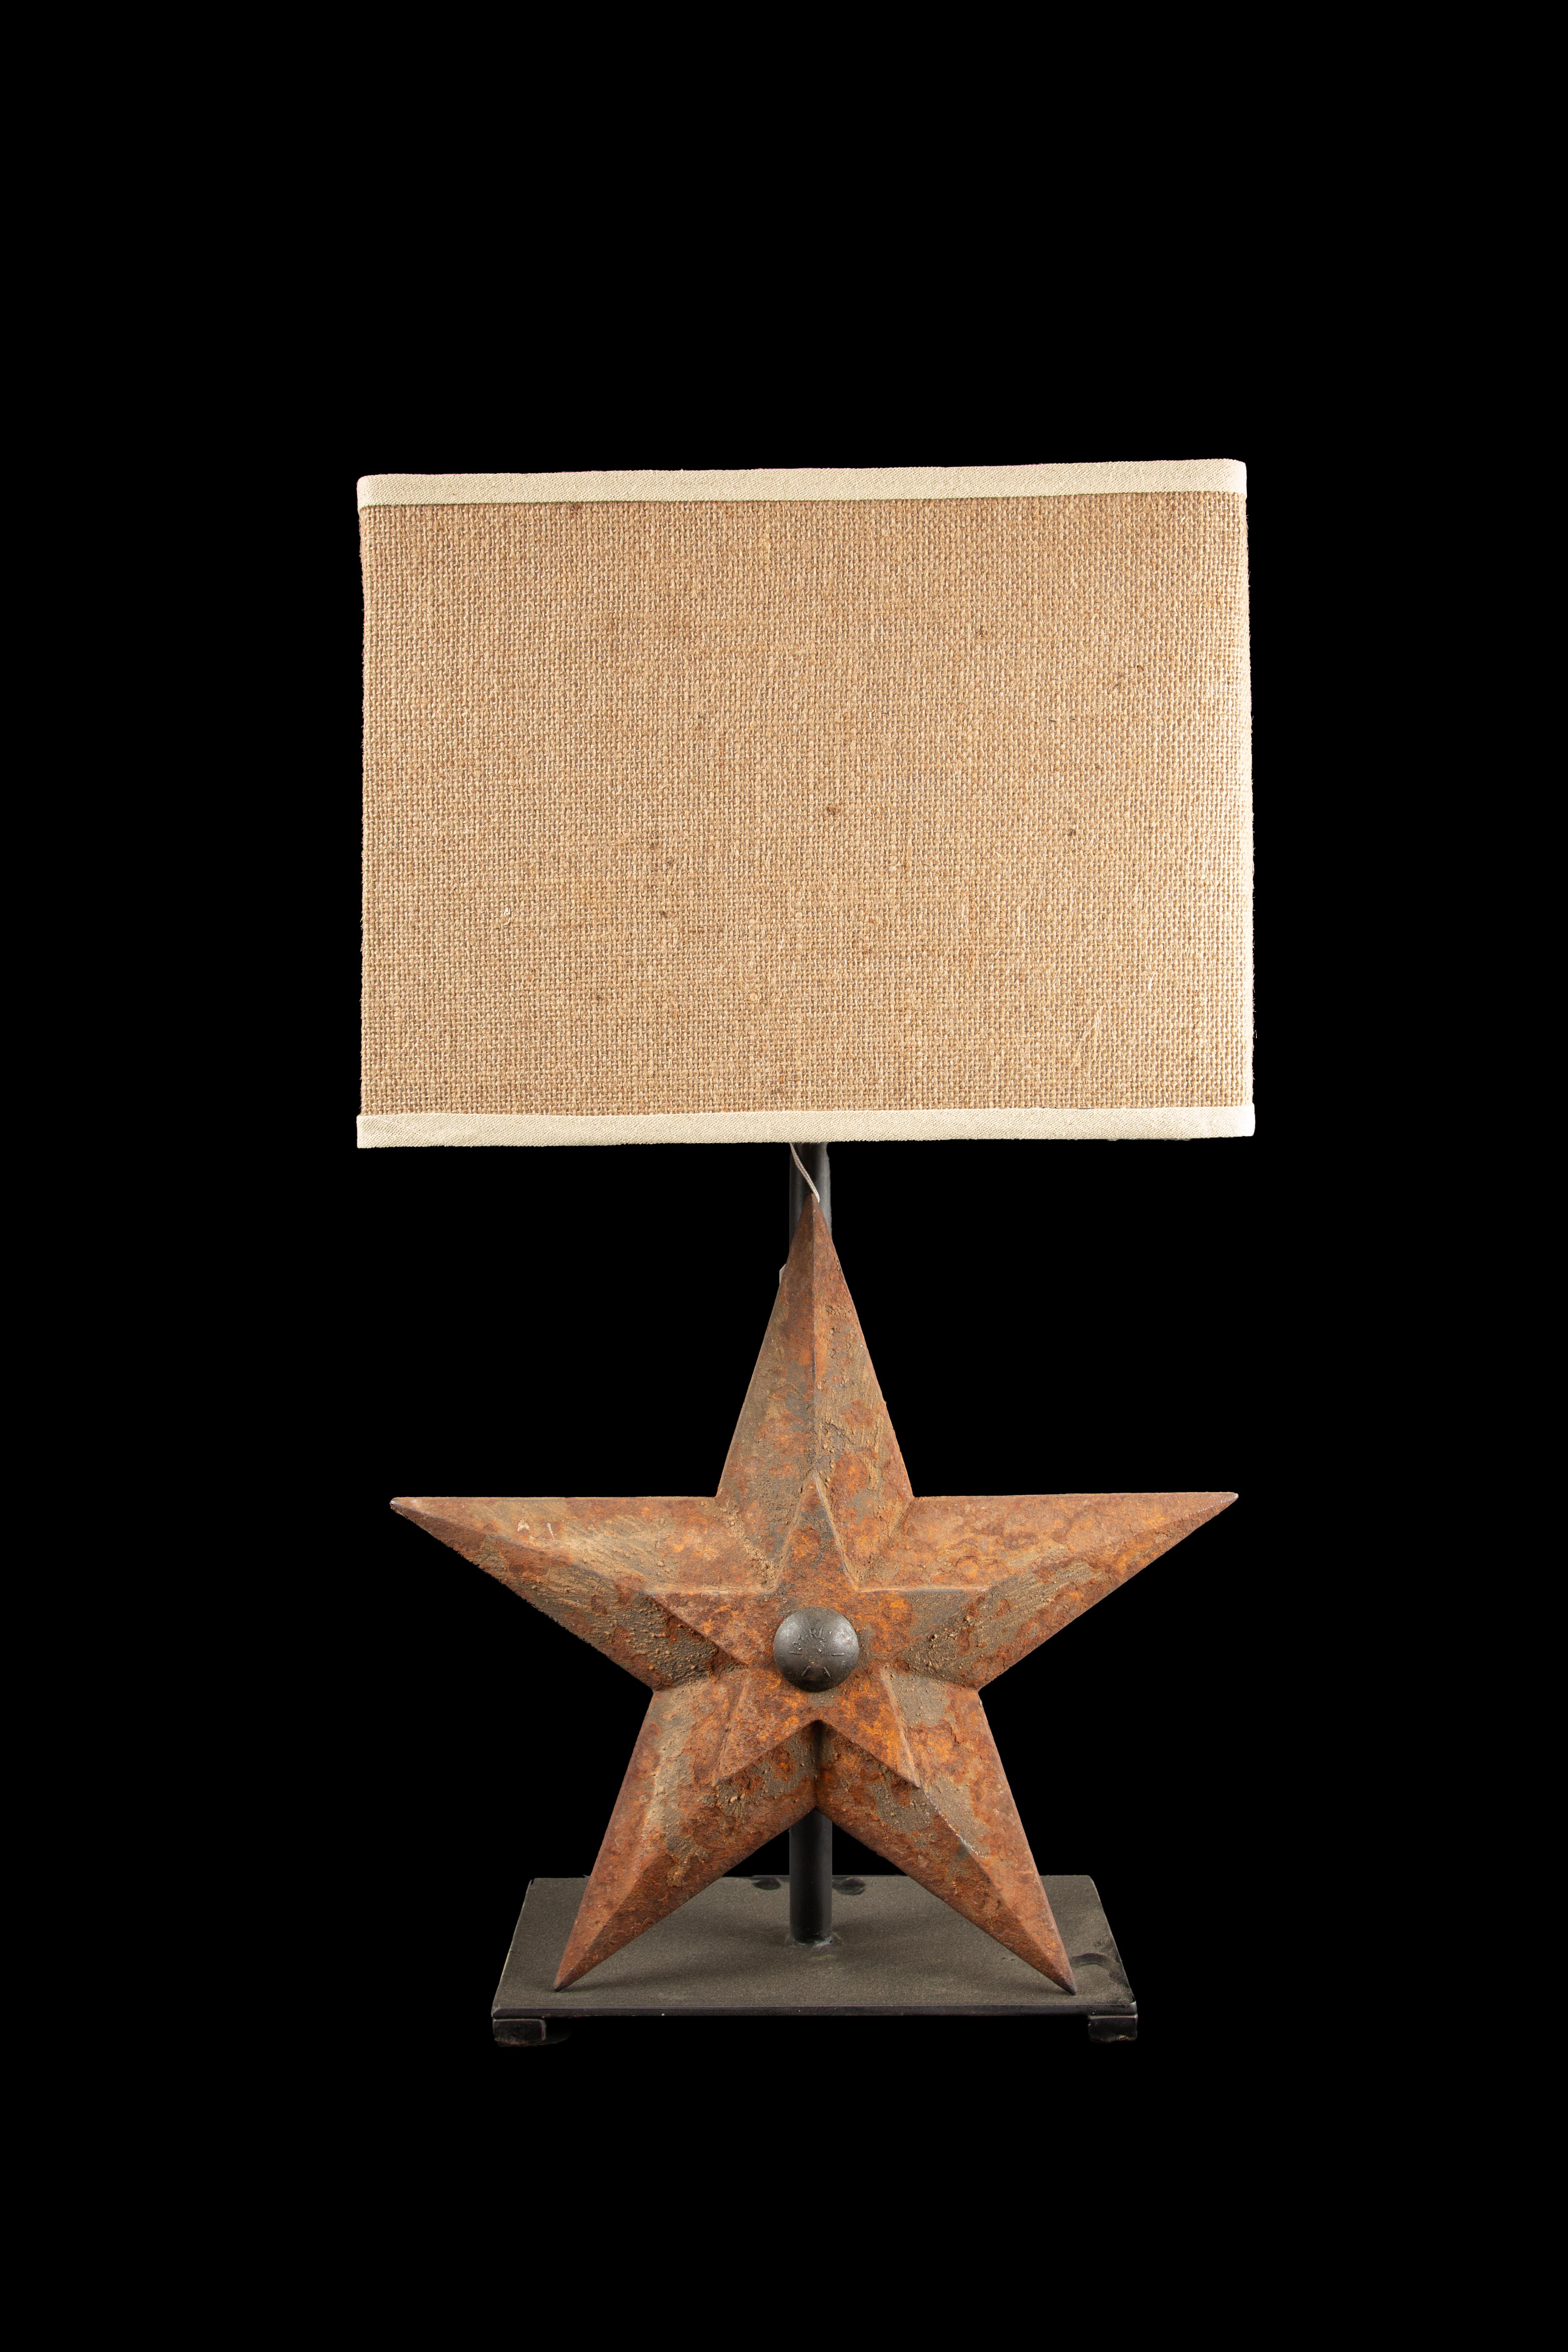 Cast Iron star lamp. Star was used as and architectural element for building and repurposed as a lamp. This fusion of form and function creates a conversation piece that not only illuminates a space but also pays homage to the past, infusing it with